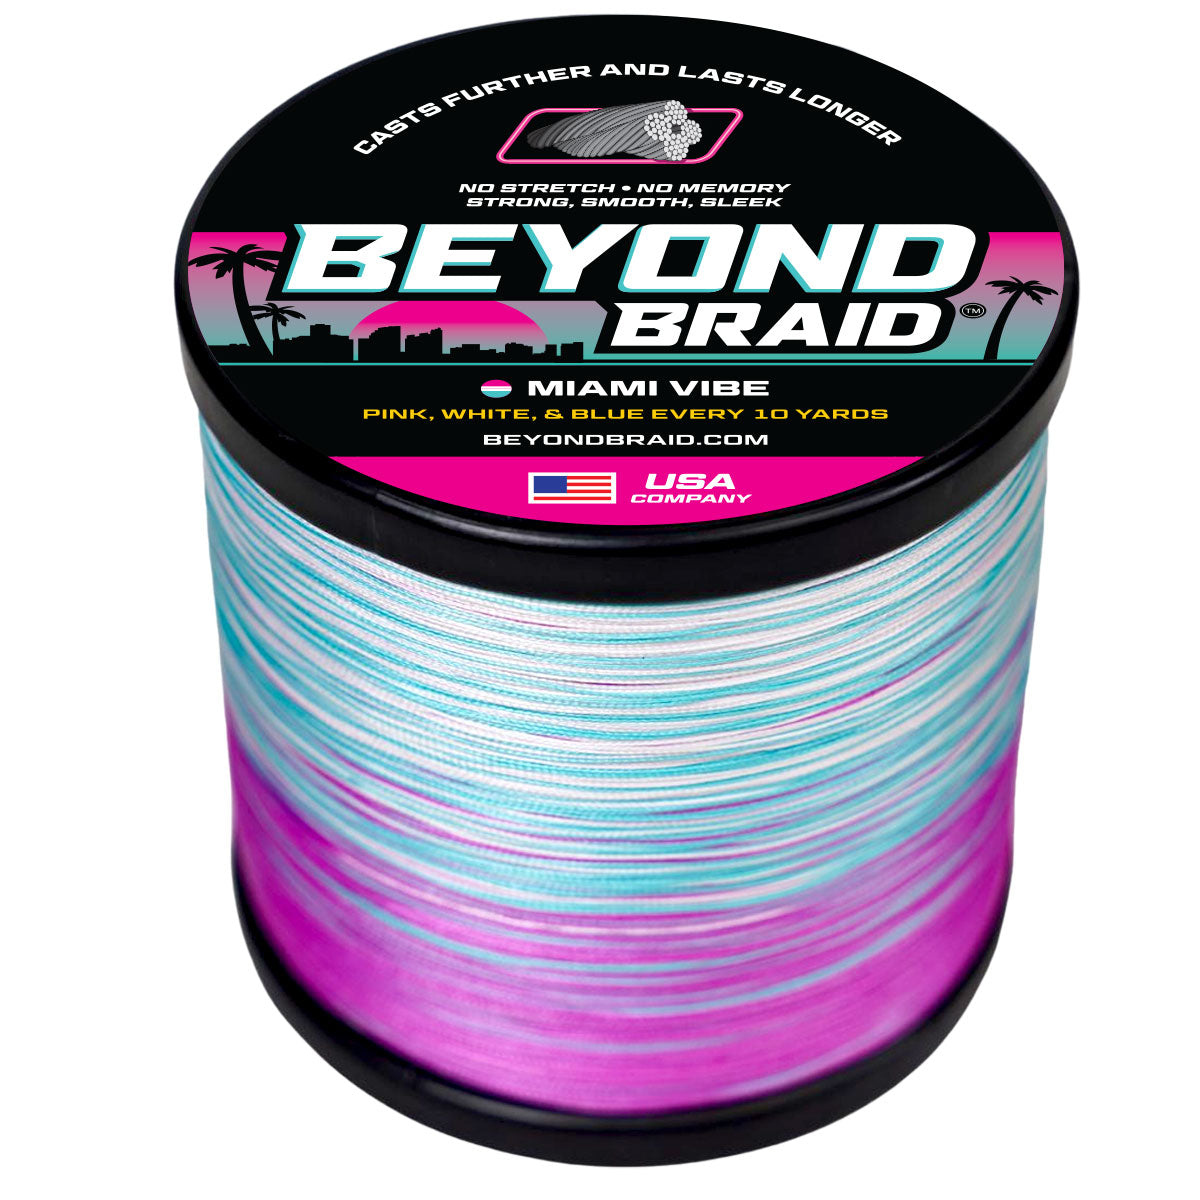 Beyond Braid - No cooler color of fishing line on the market